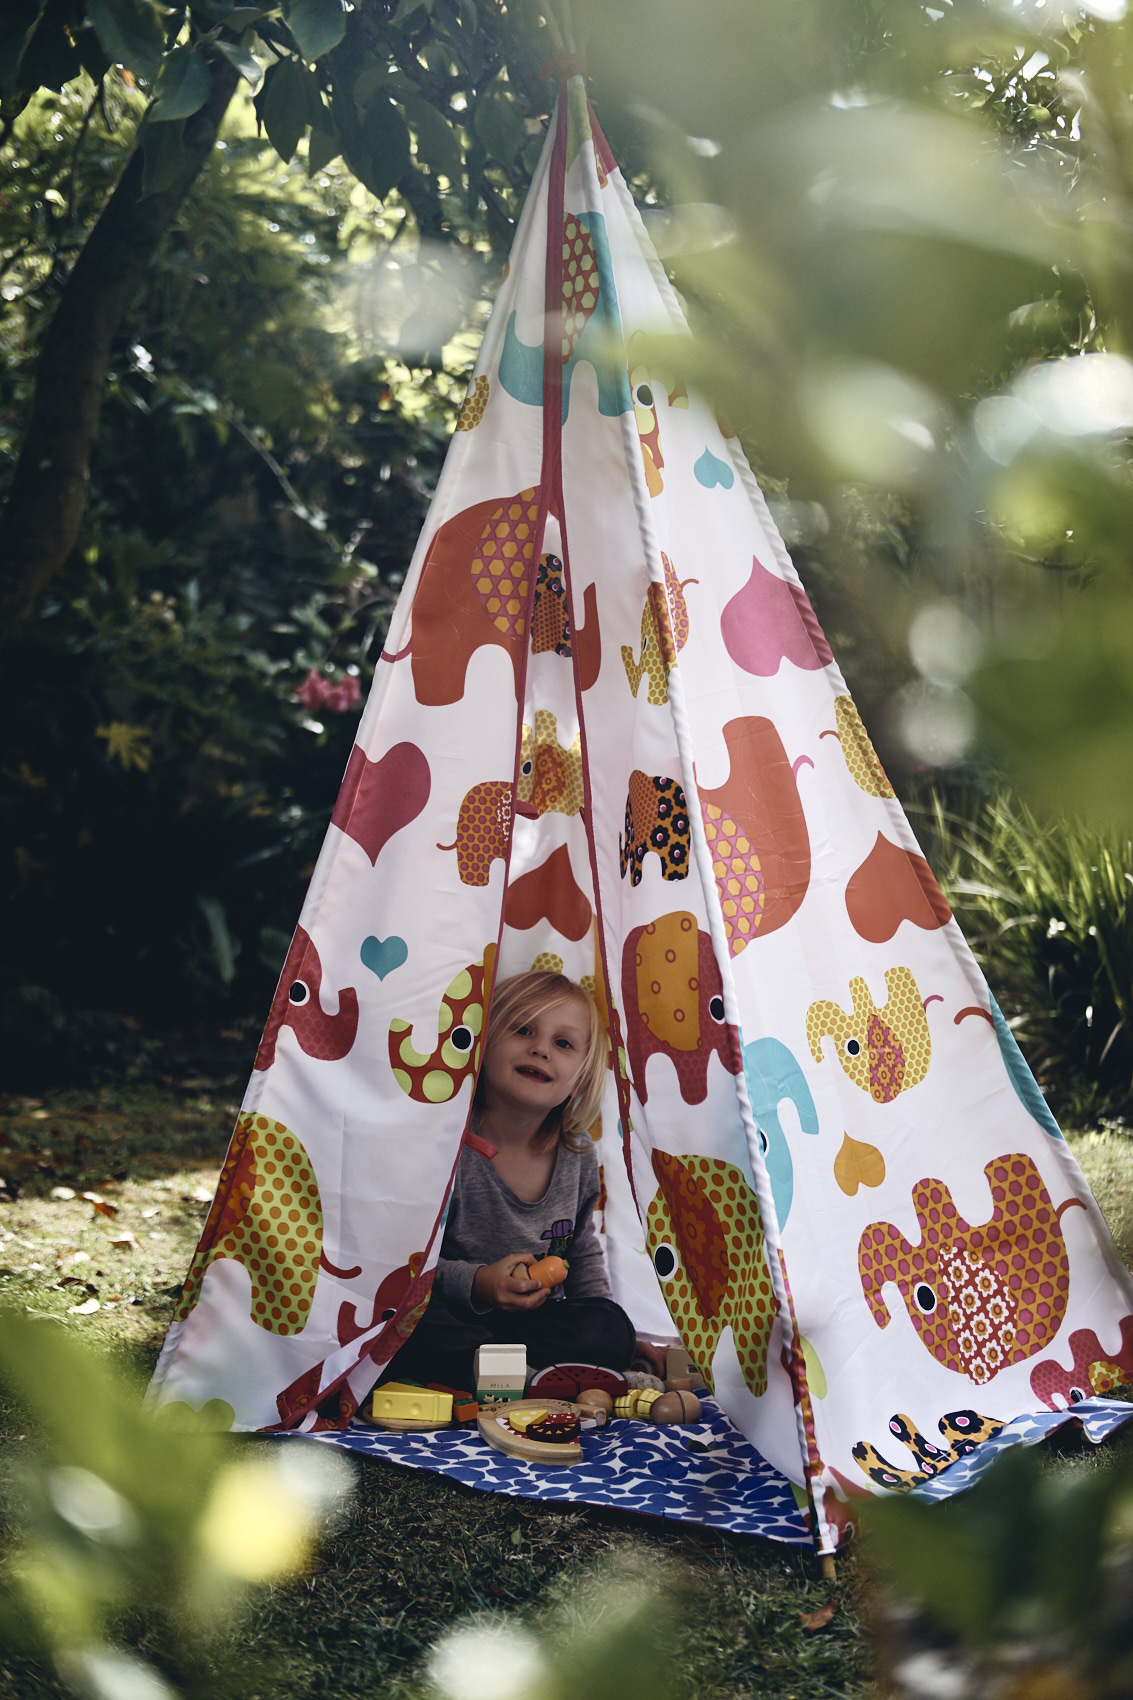 Lockdown • Young Boy Playing with Toys in Garden Tent • Lifestyle & Portrait Photography